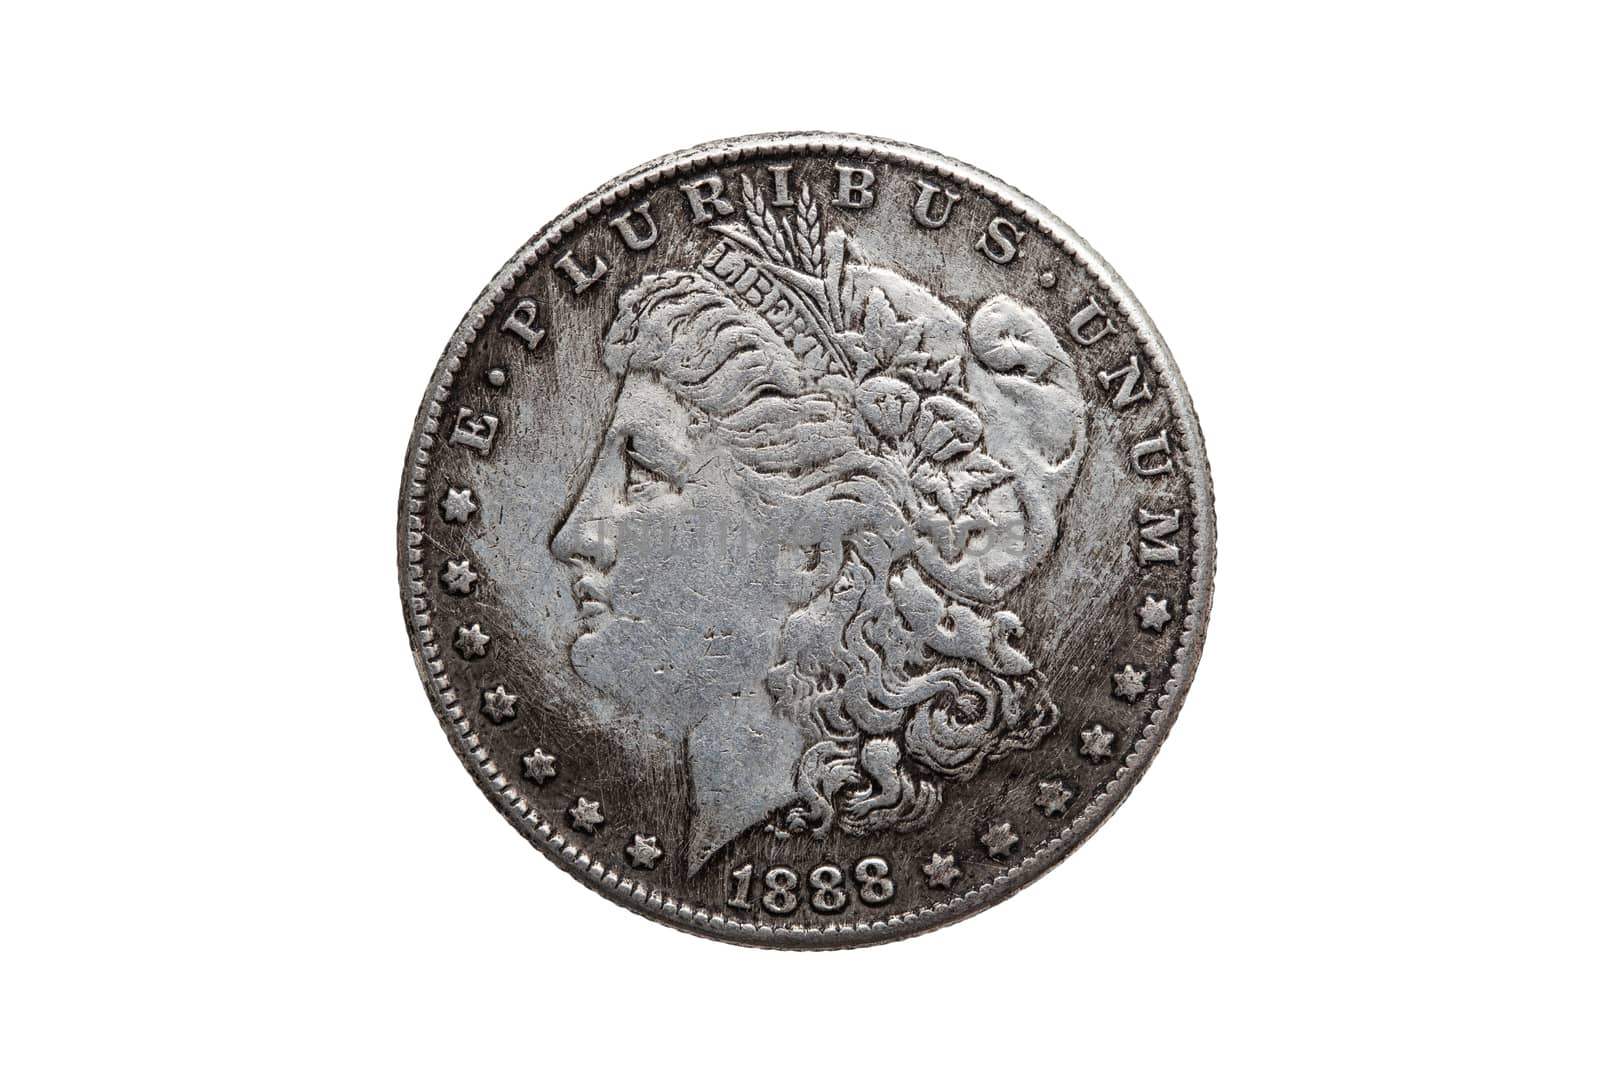 USA One Dollar Morgan Silver Coin replica dated 1880 with a portrait image of Liberty on the obverse cut out and isolated on a white background